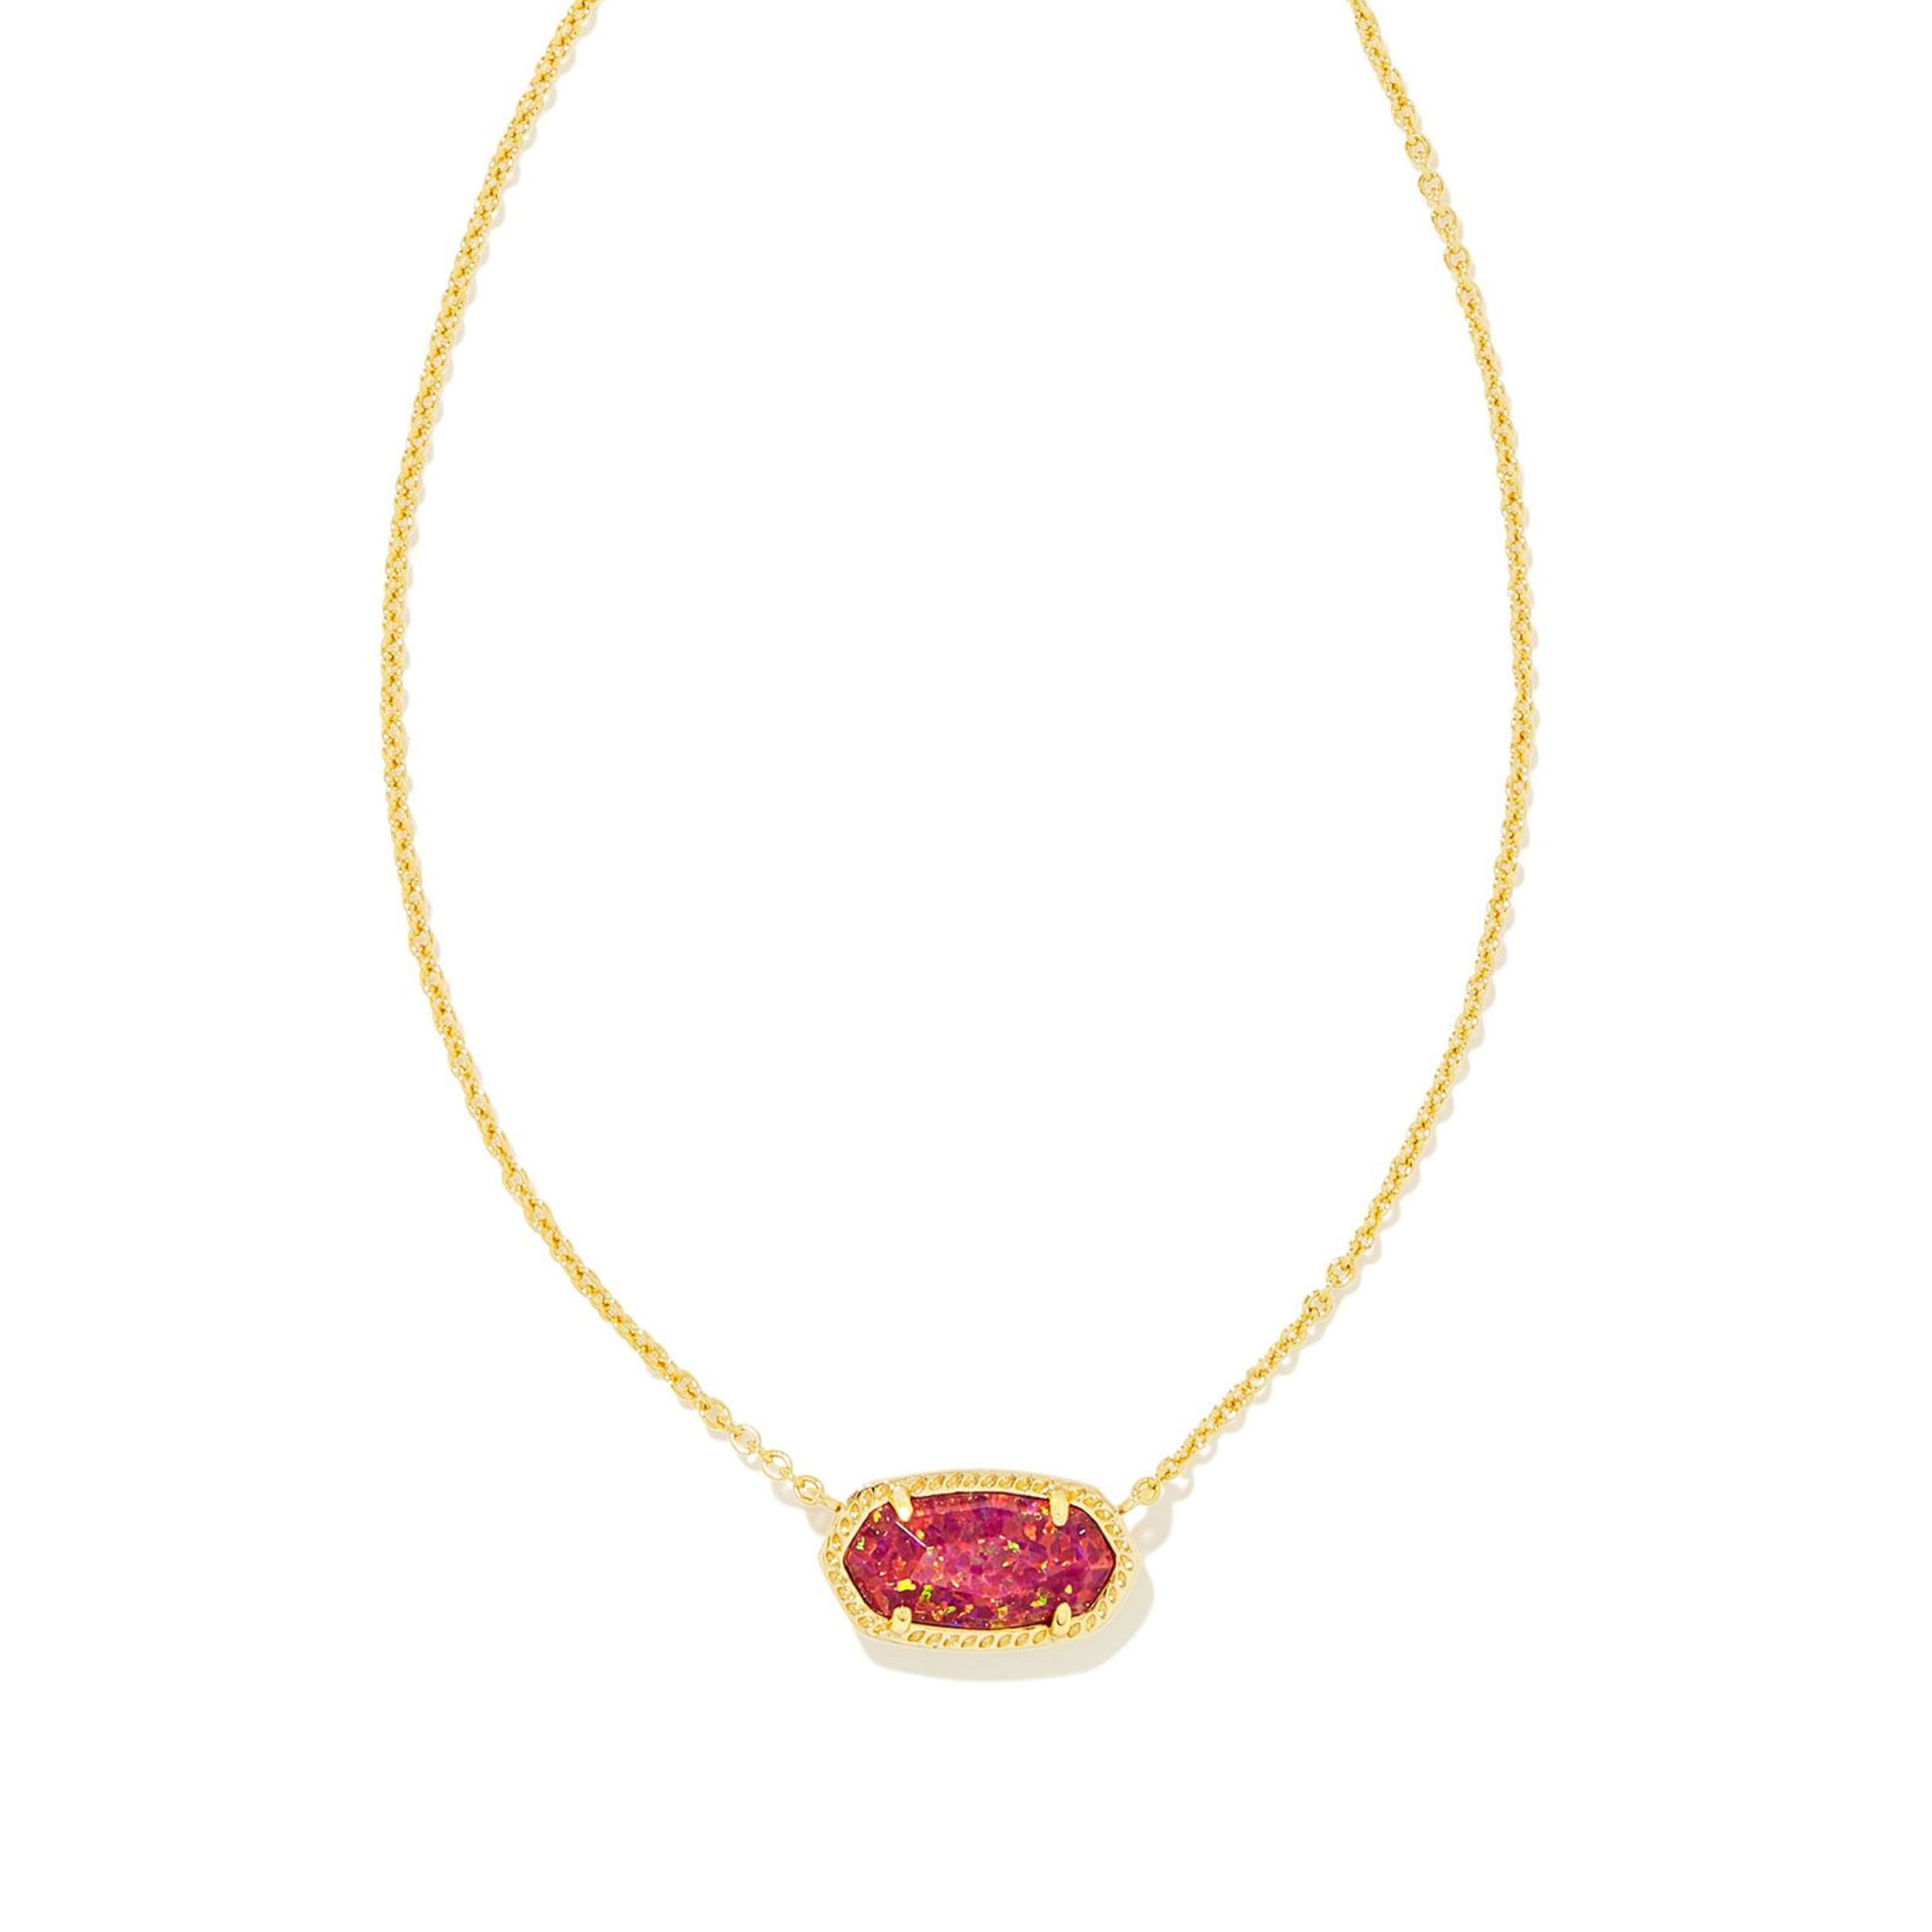 Pictured on a white background is a gold chain necklace with a gold pendant that includes a red opal stone. 